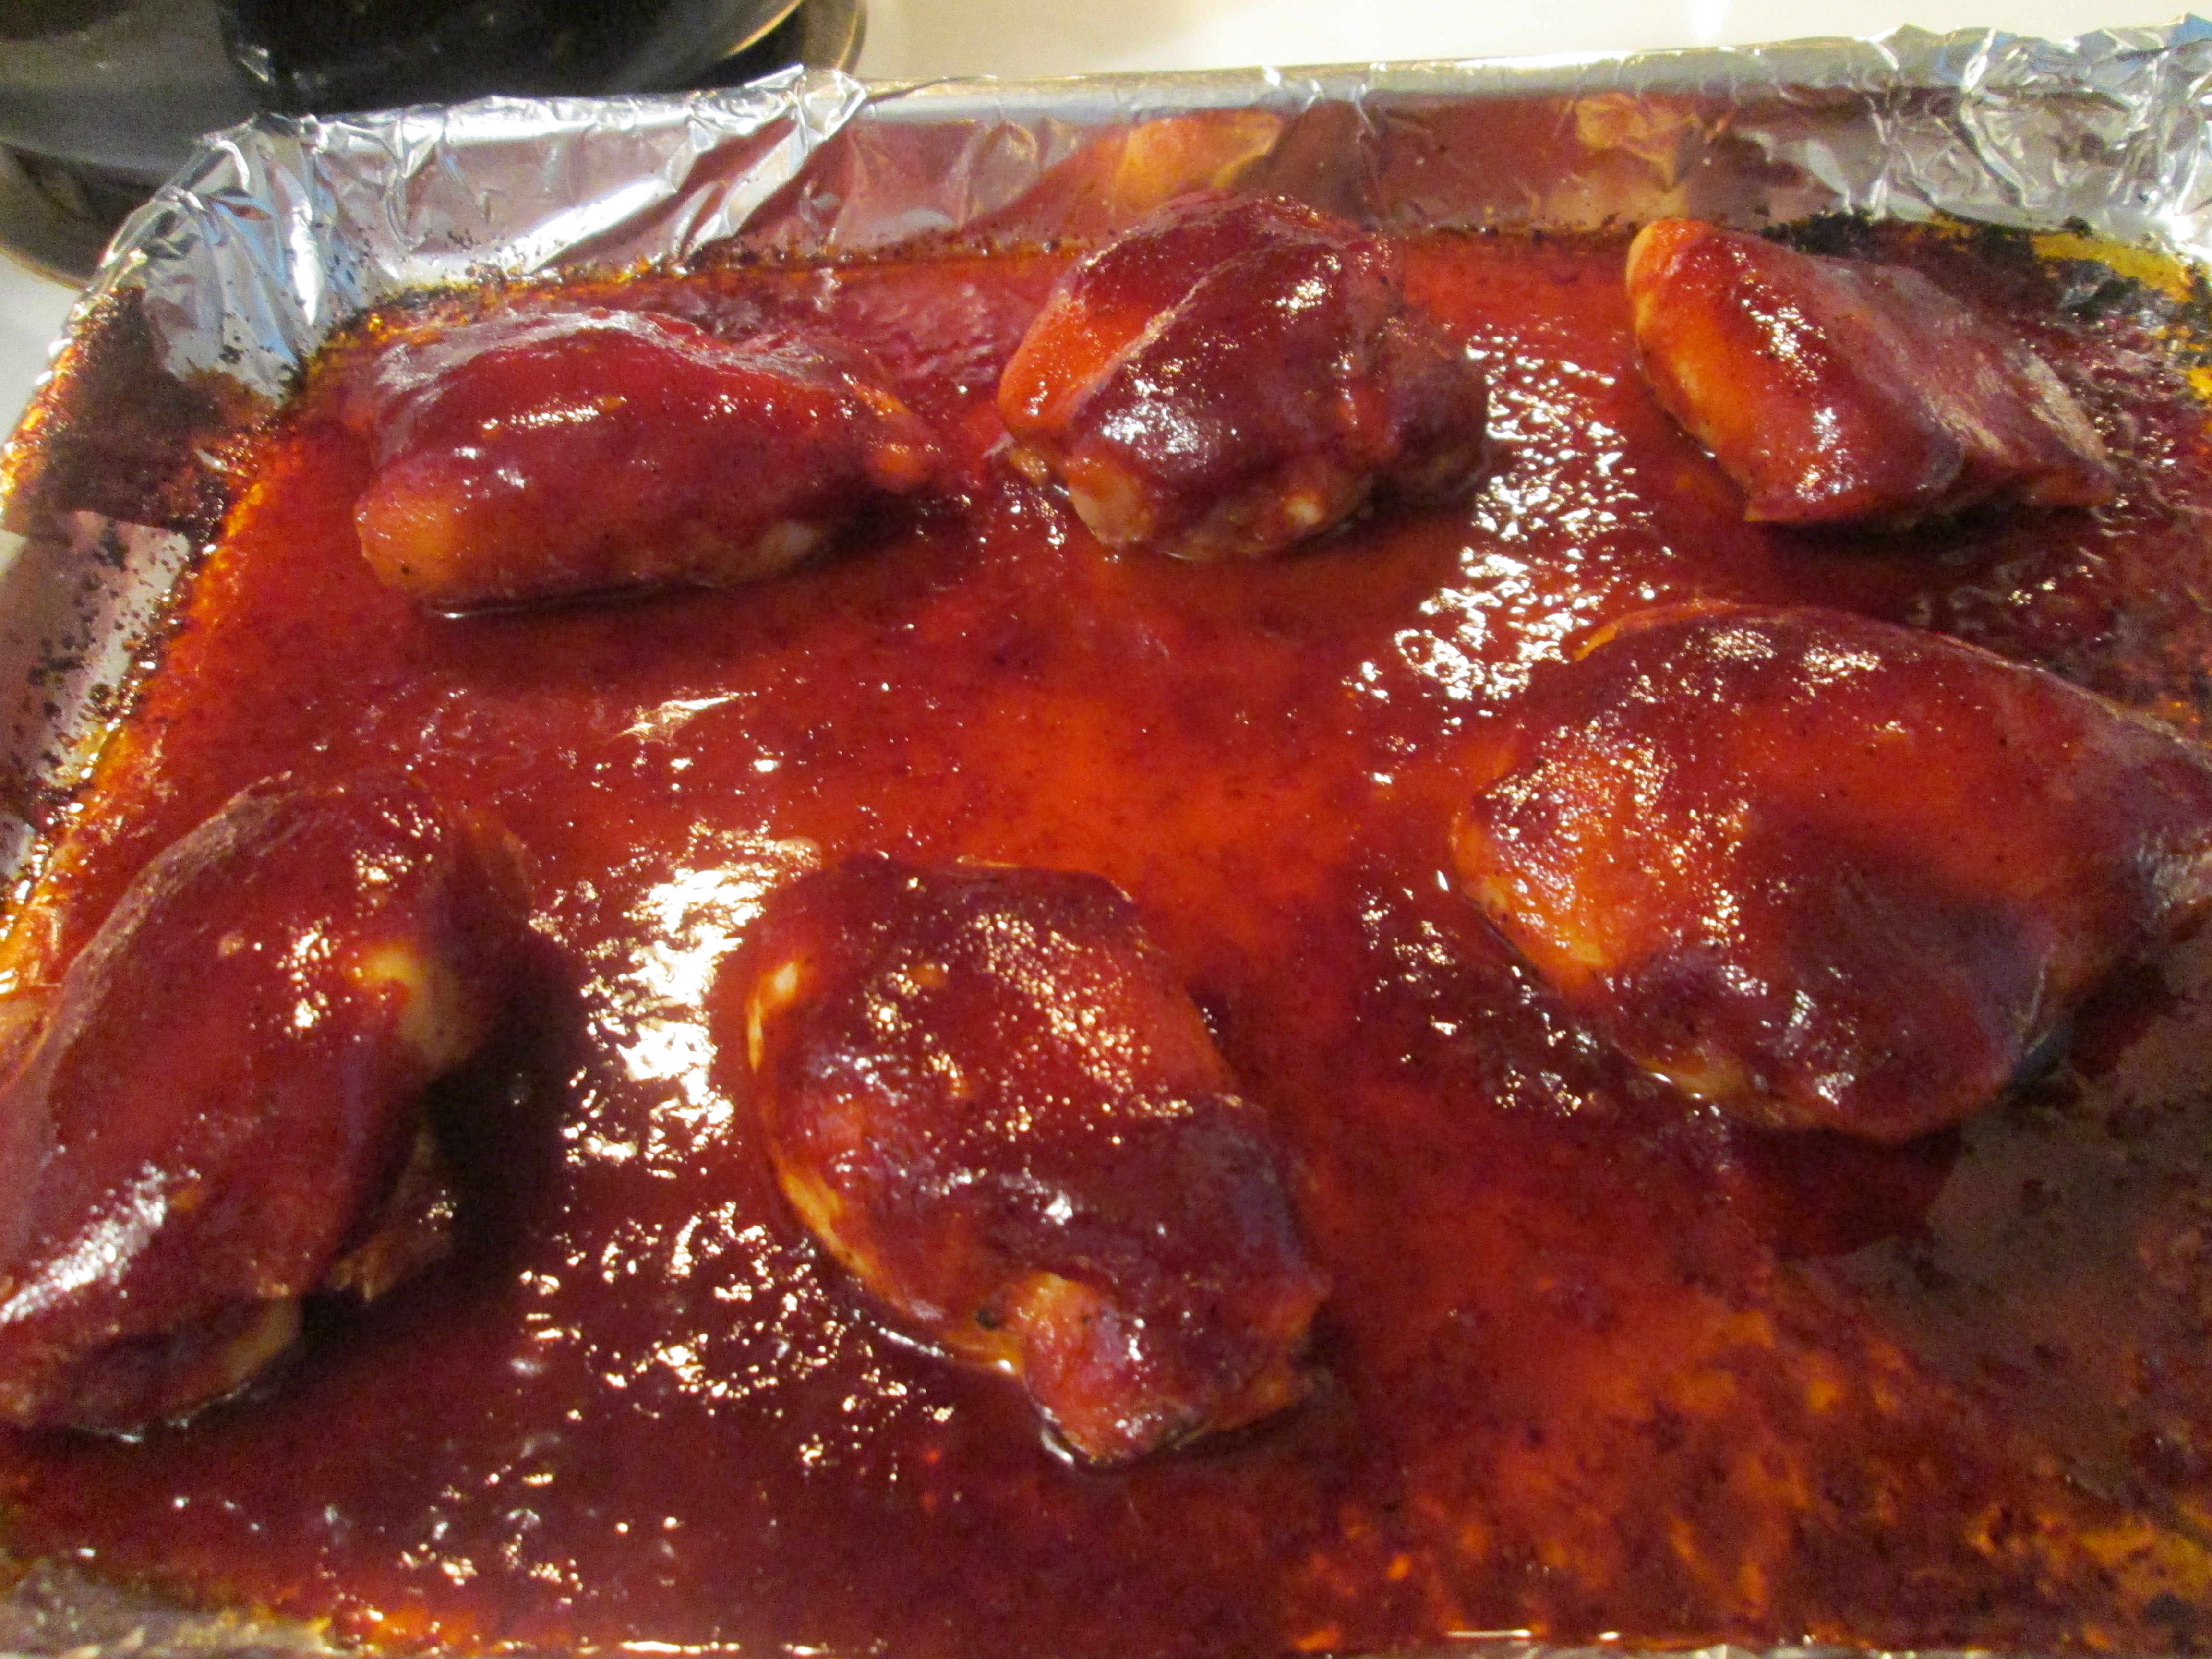 Bbq Chicken Thighs In Oven
 Oven Roasted BBQ Chicken Thighs